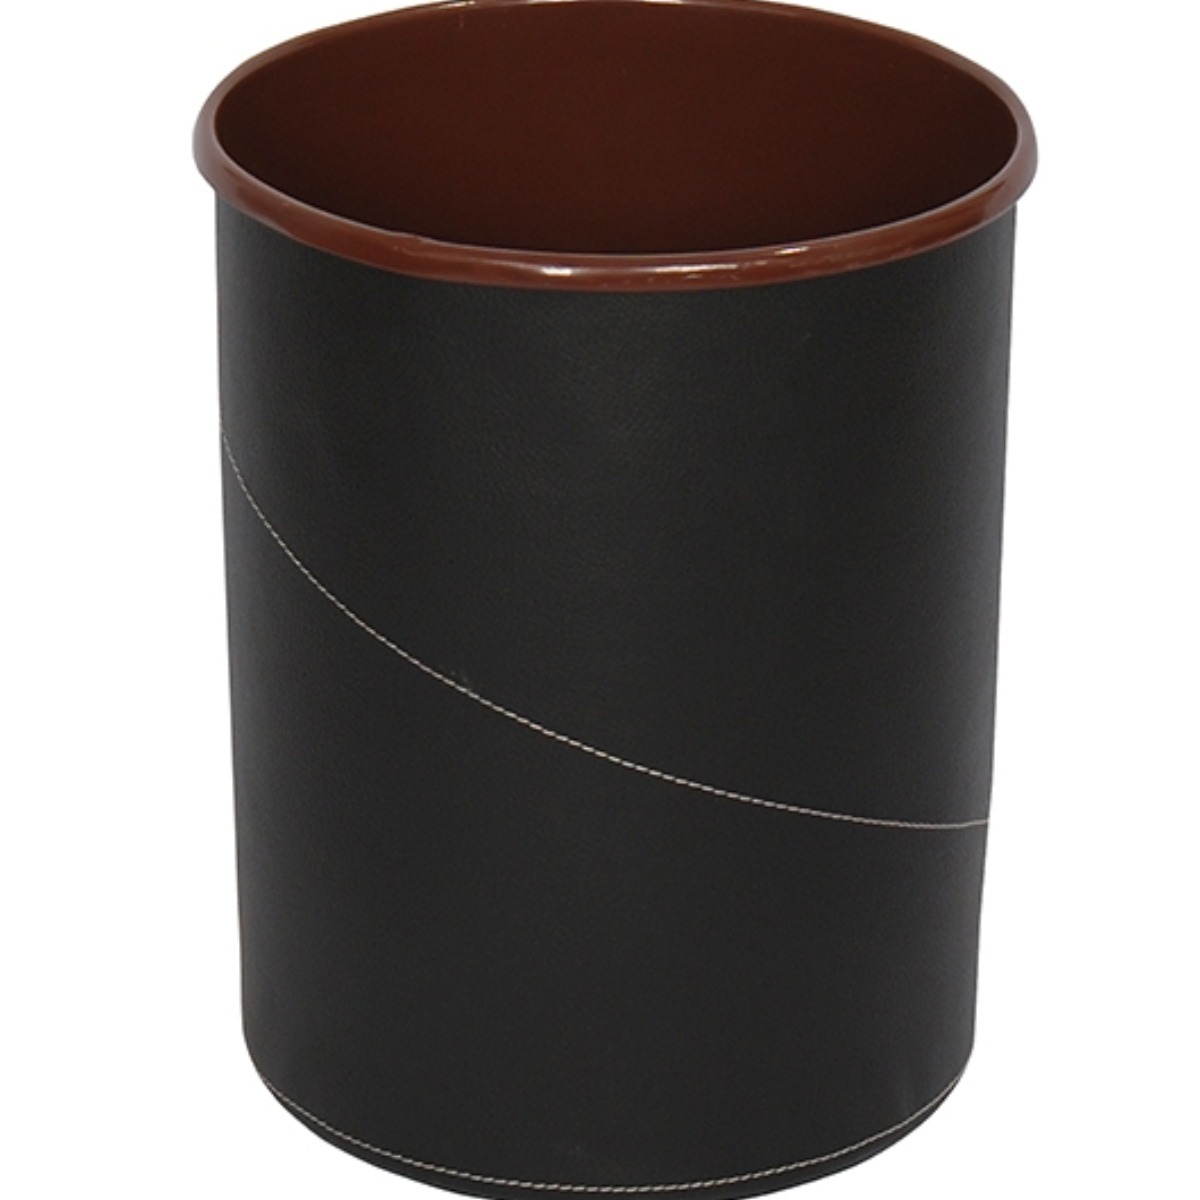 AB-307 Leather Lined Dustbin product logo